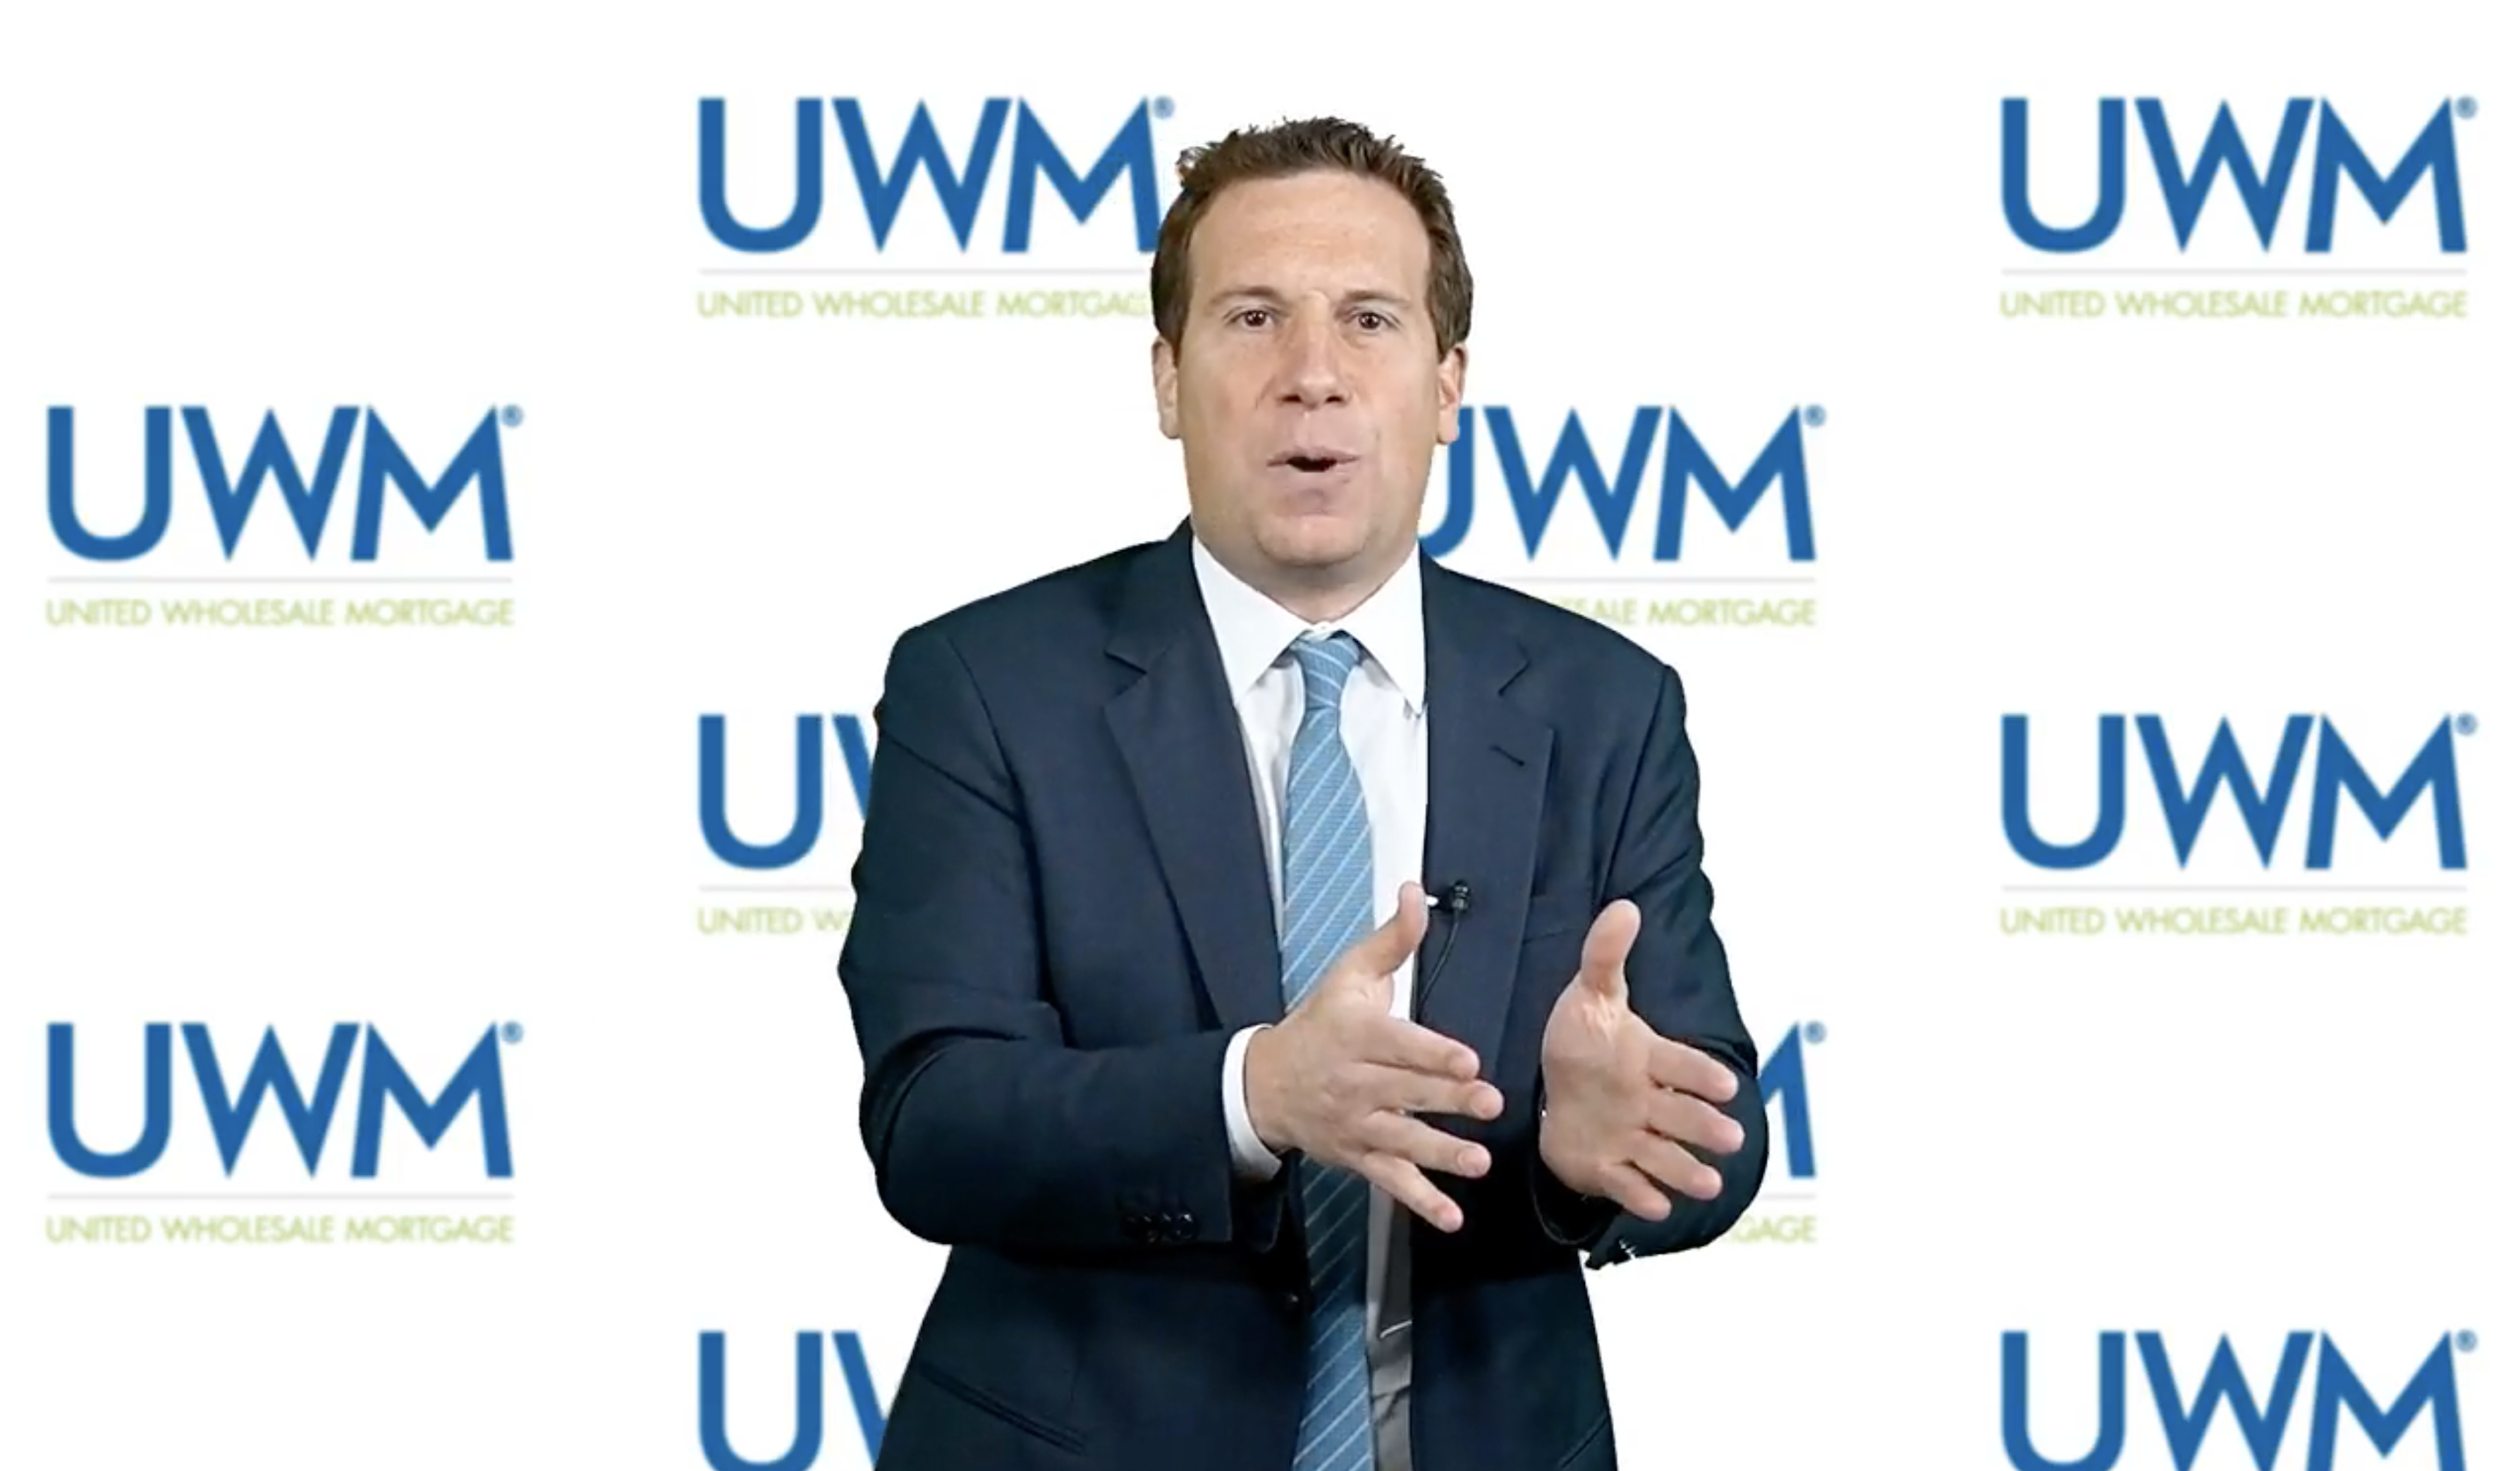 America’s MoneyLine CEO Fights Back, Calls Out Mat Ishbia And Files Counter-Complaint Against UWM